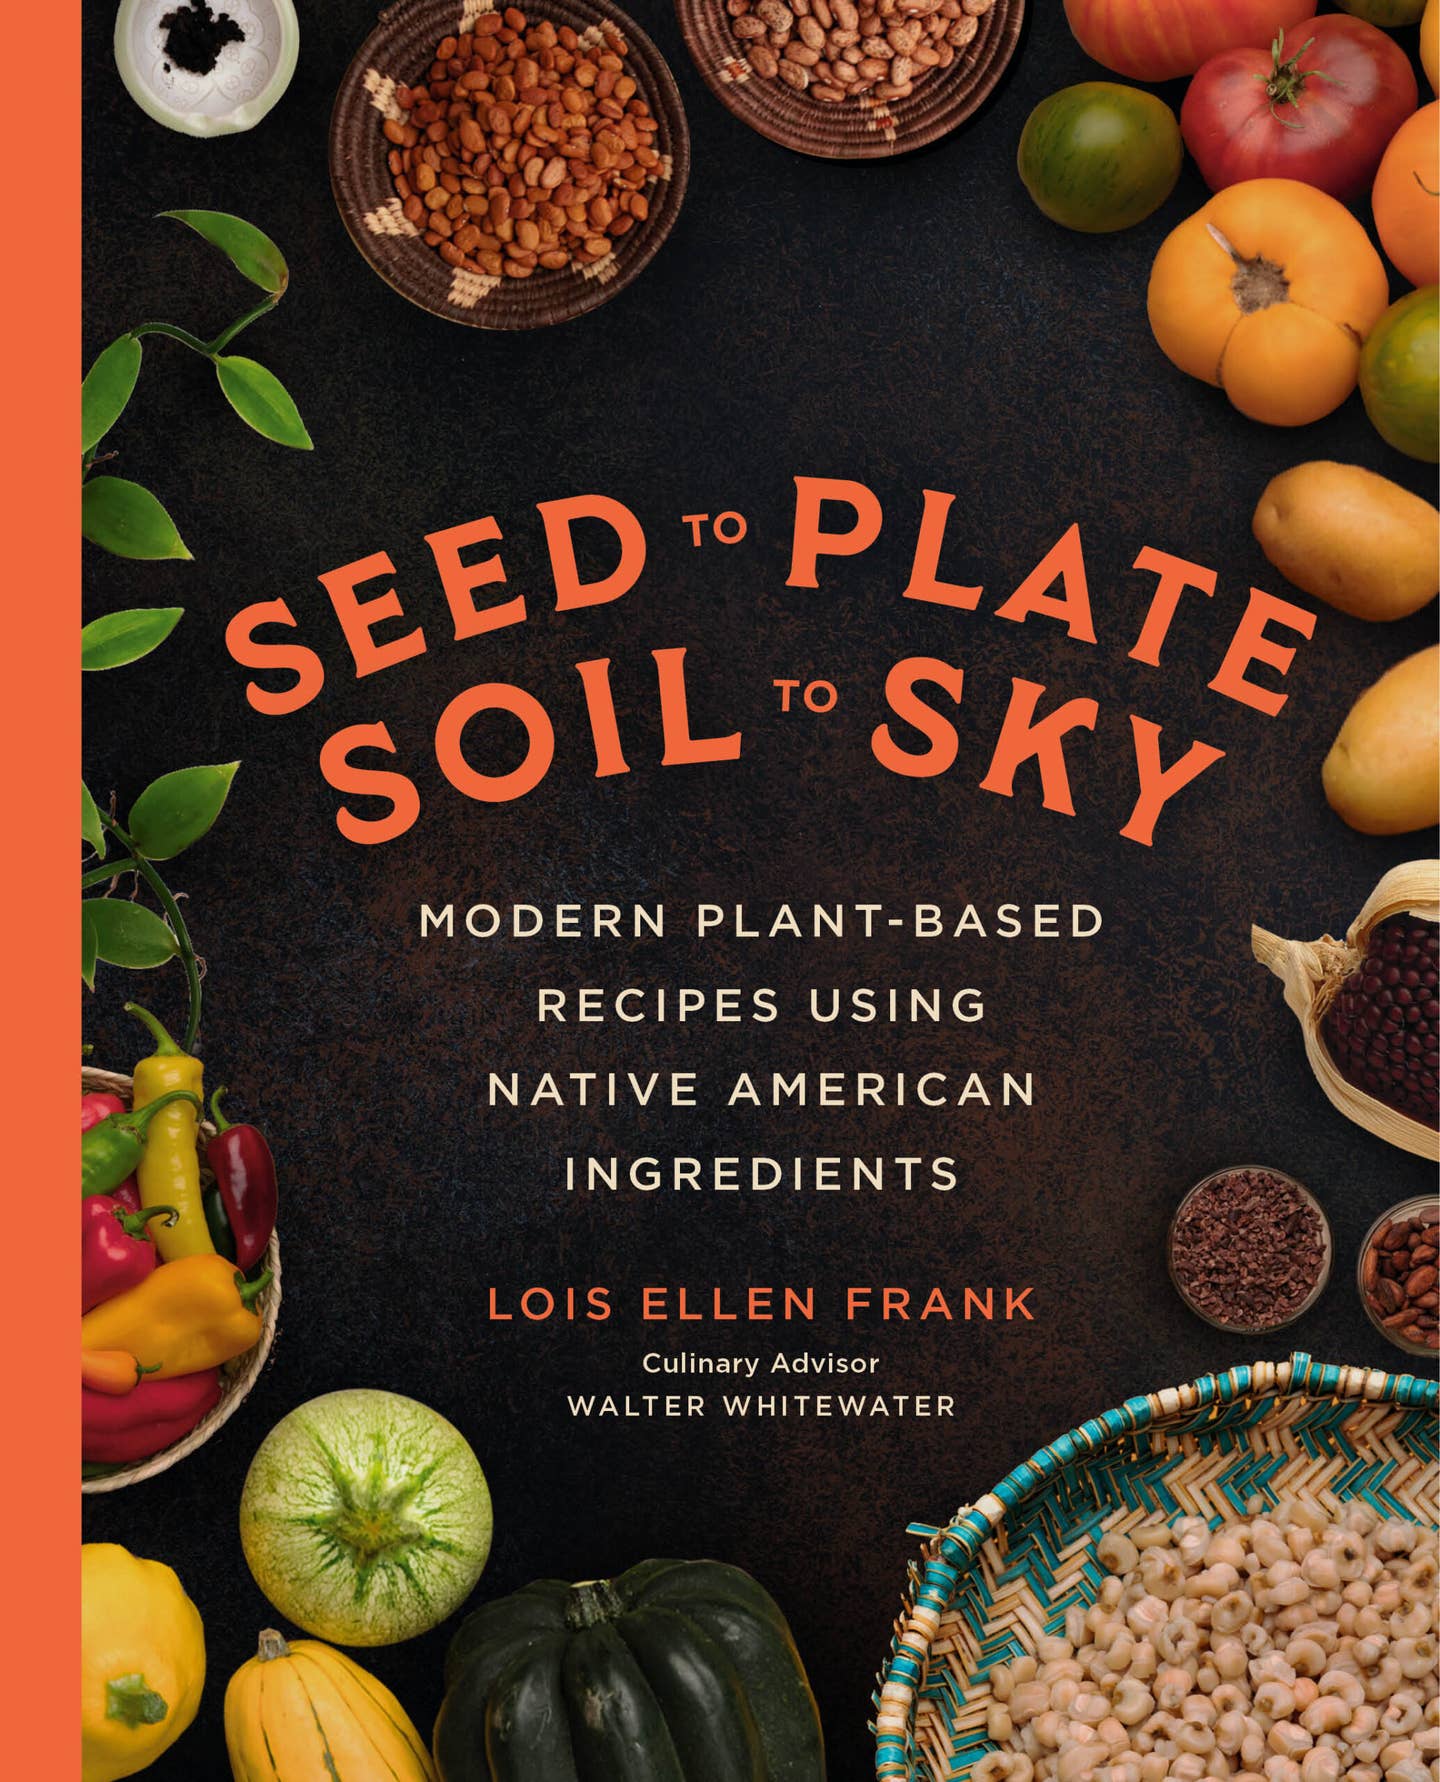 Seed to plate Book